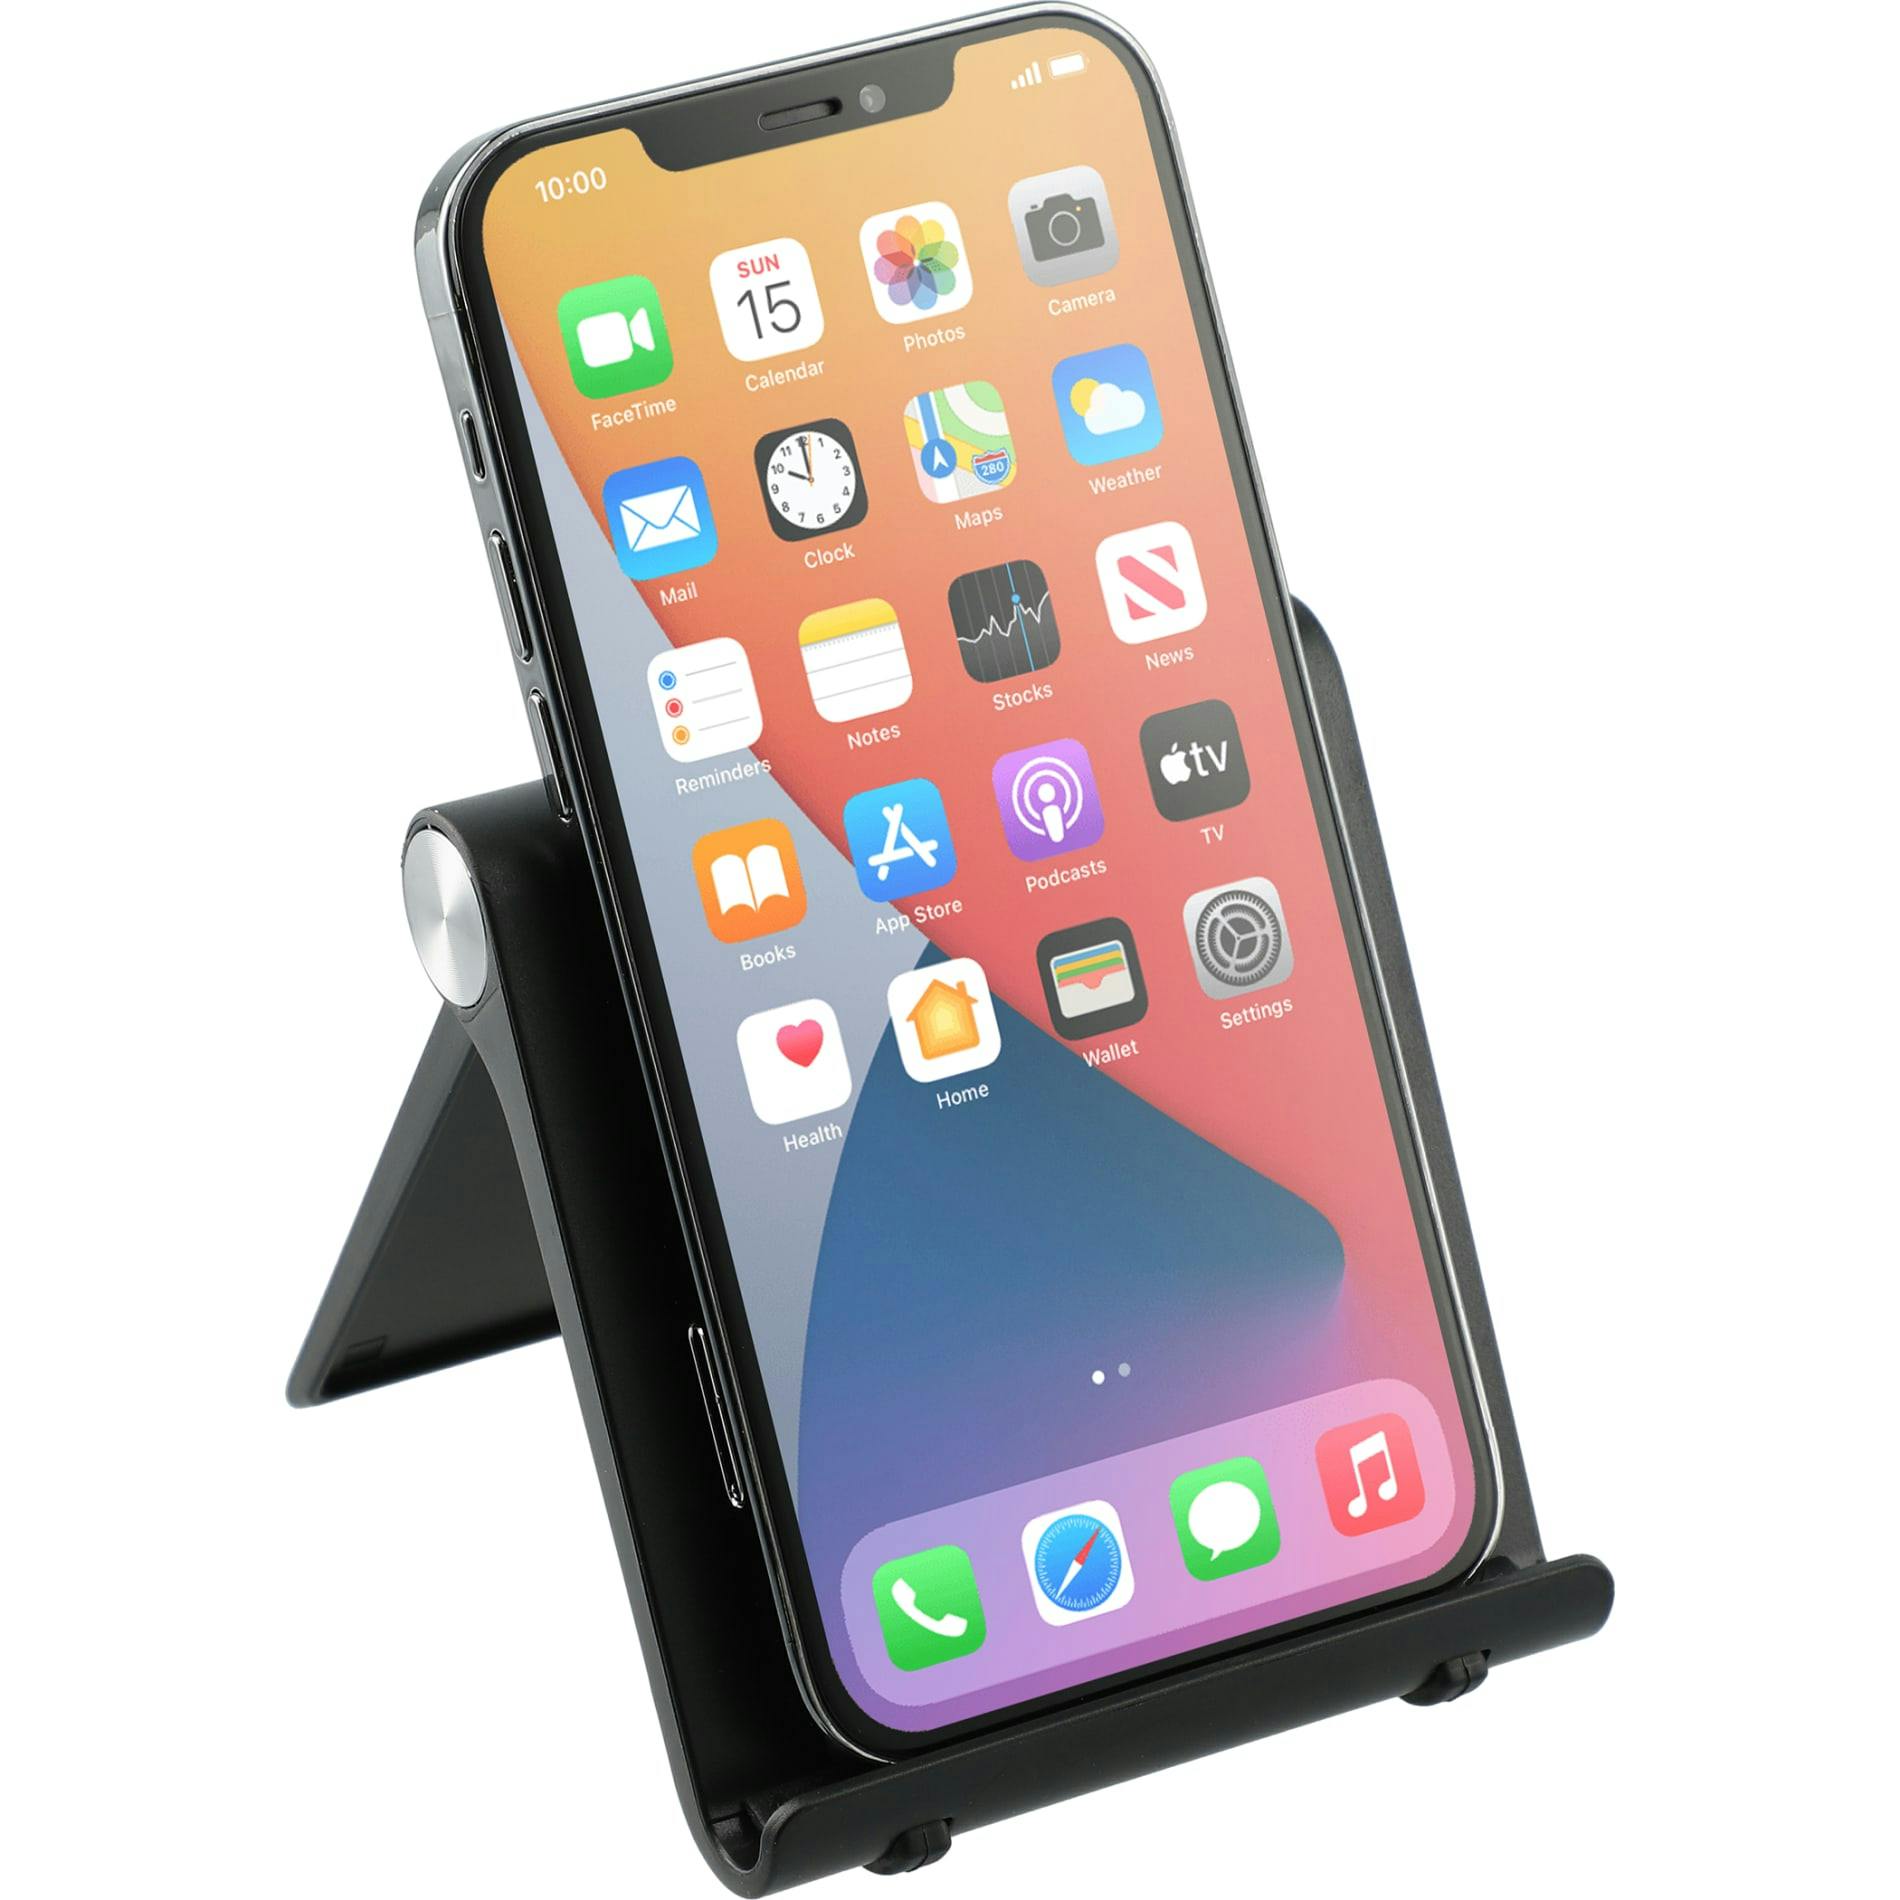 Resty Phone and Tablet Stand - additional Image 1